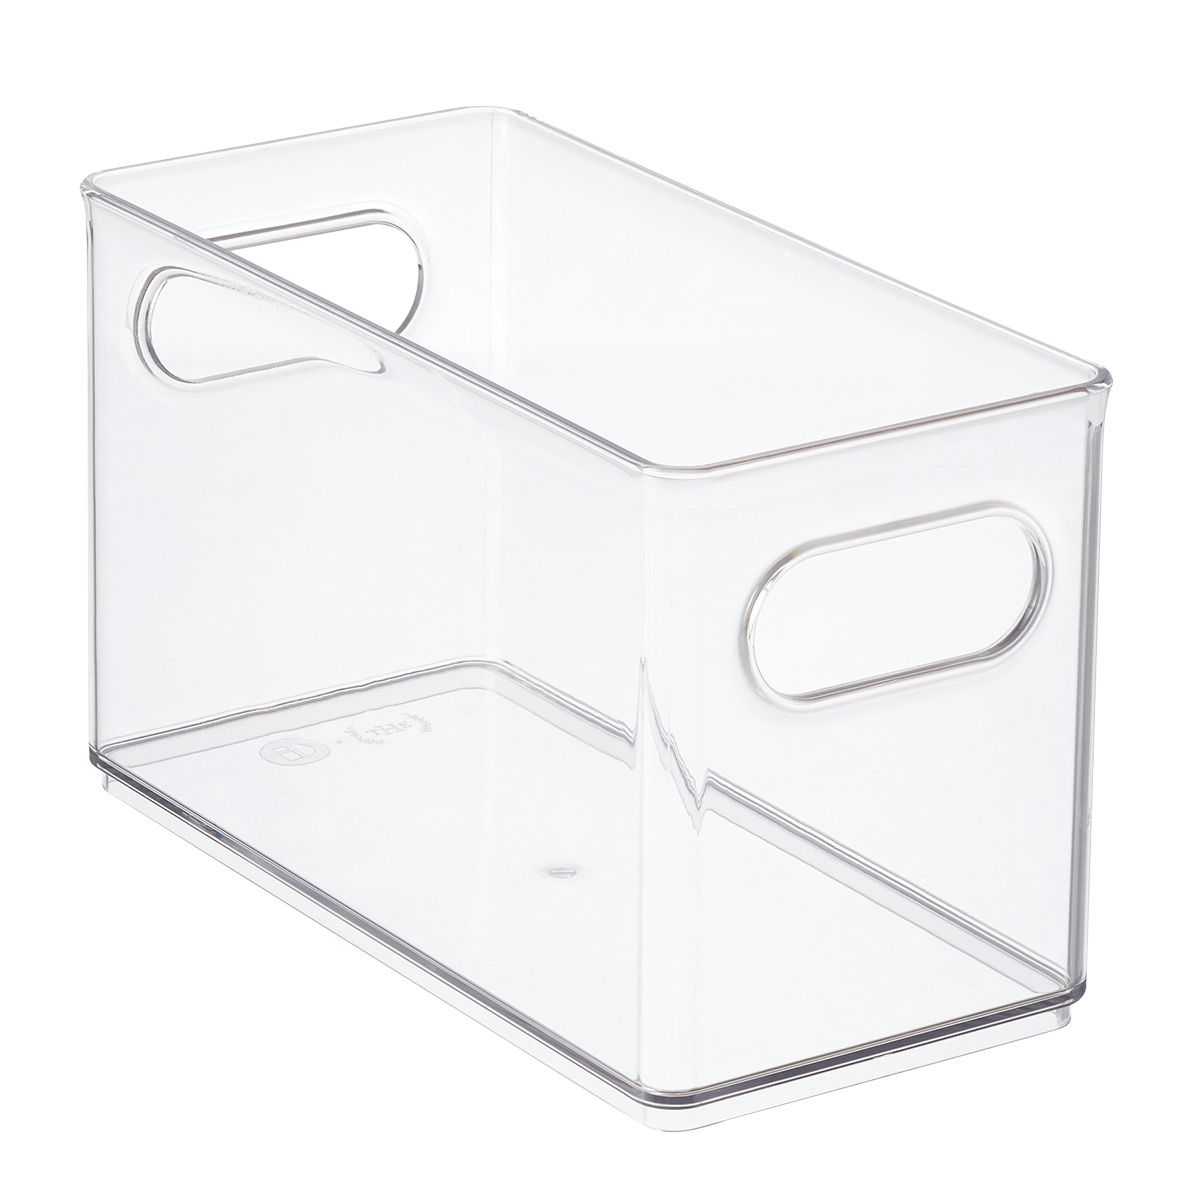 T.H.E. Narrow Pantry Bin | The Container Store